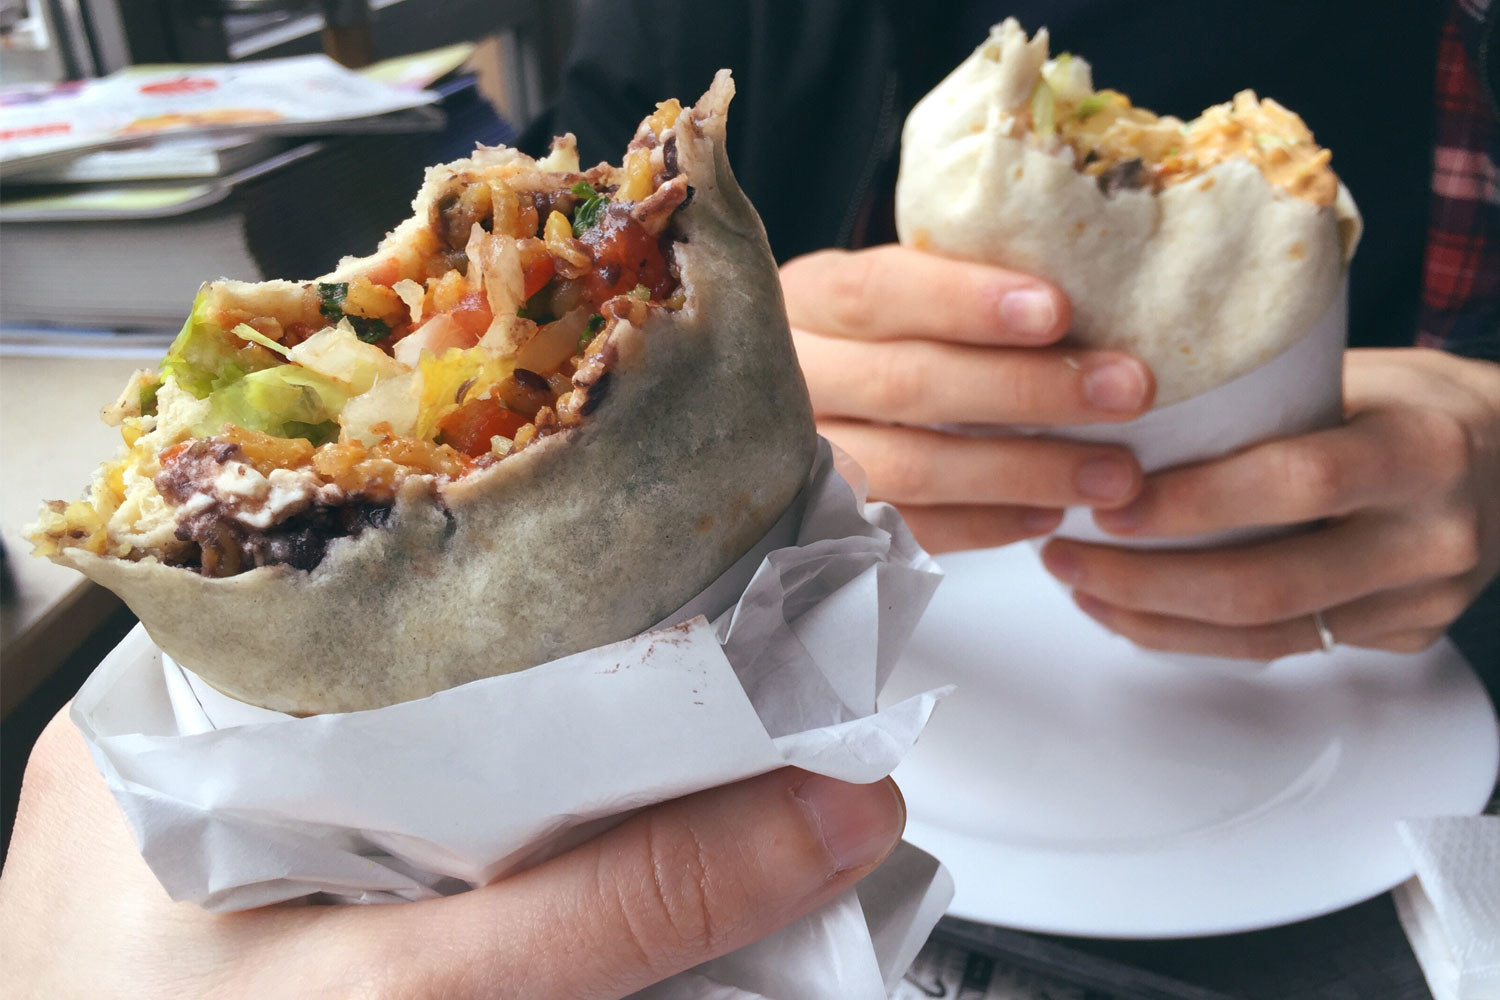 Two people holding burritos.